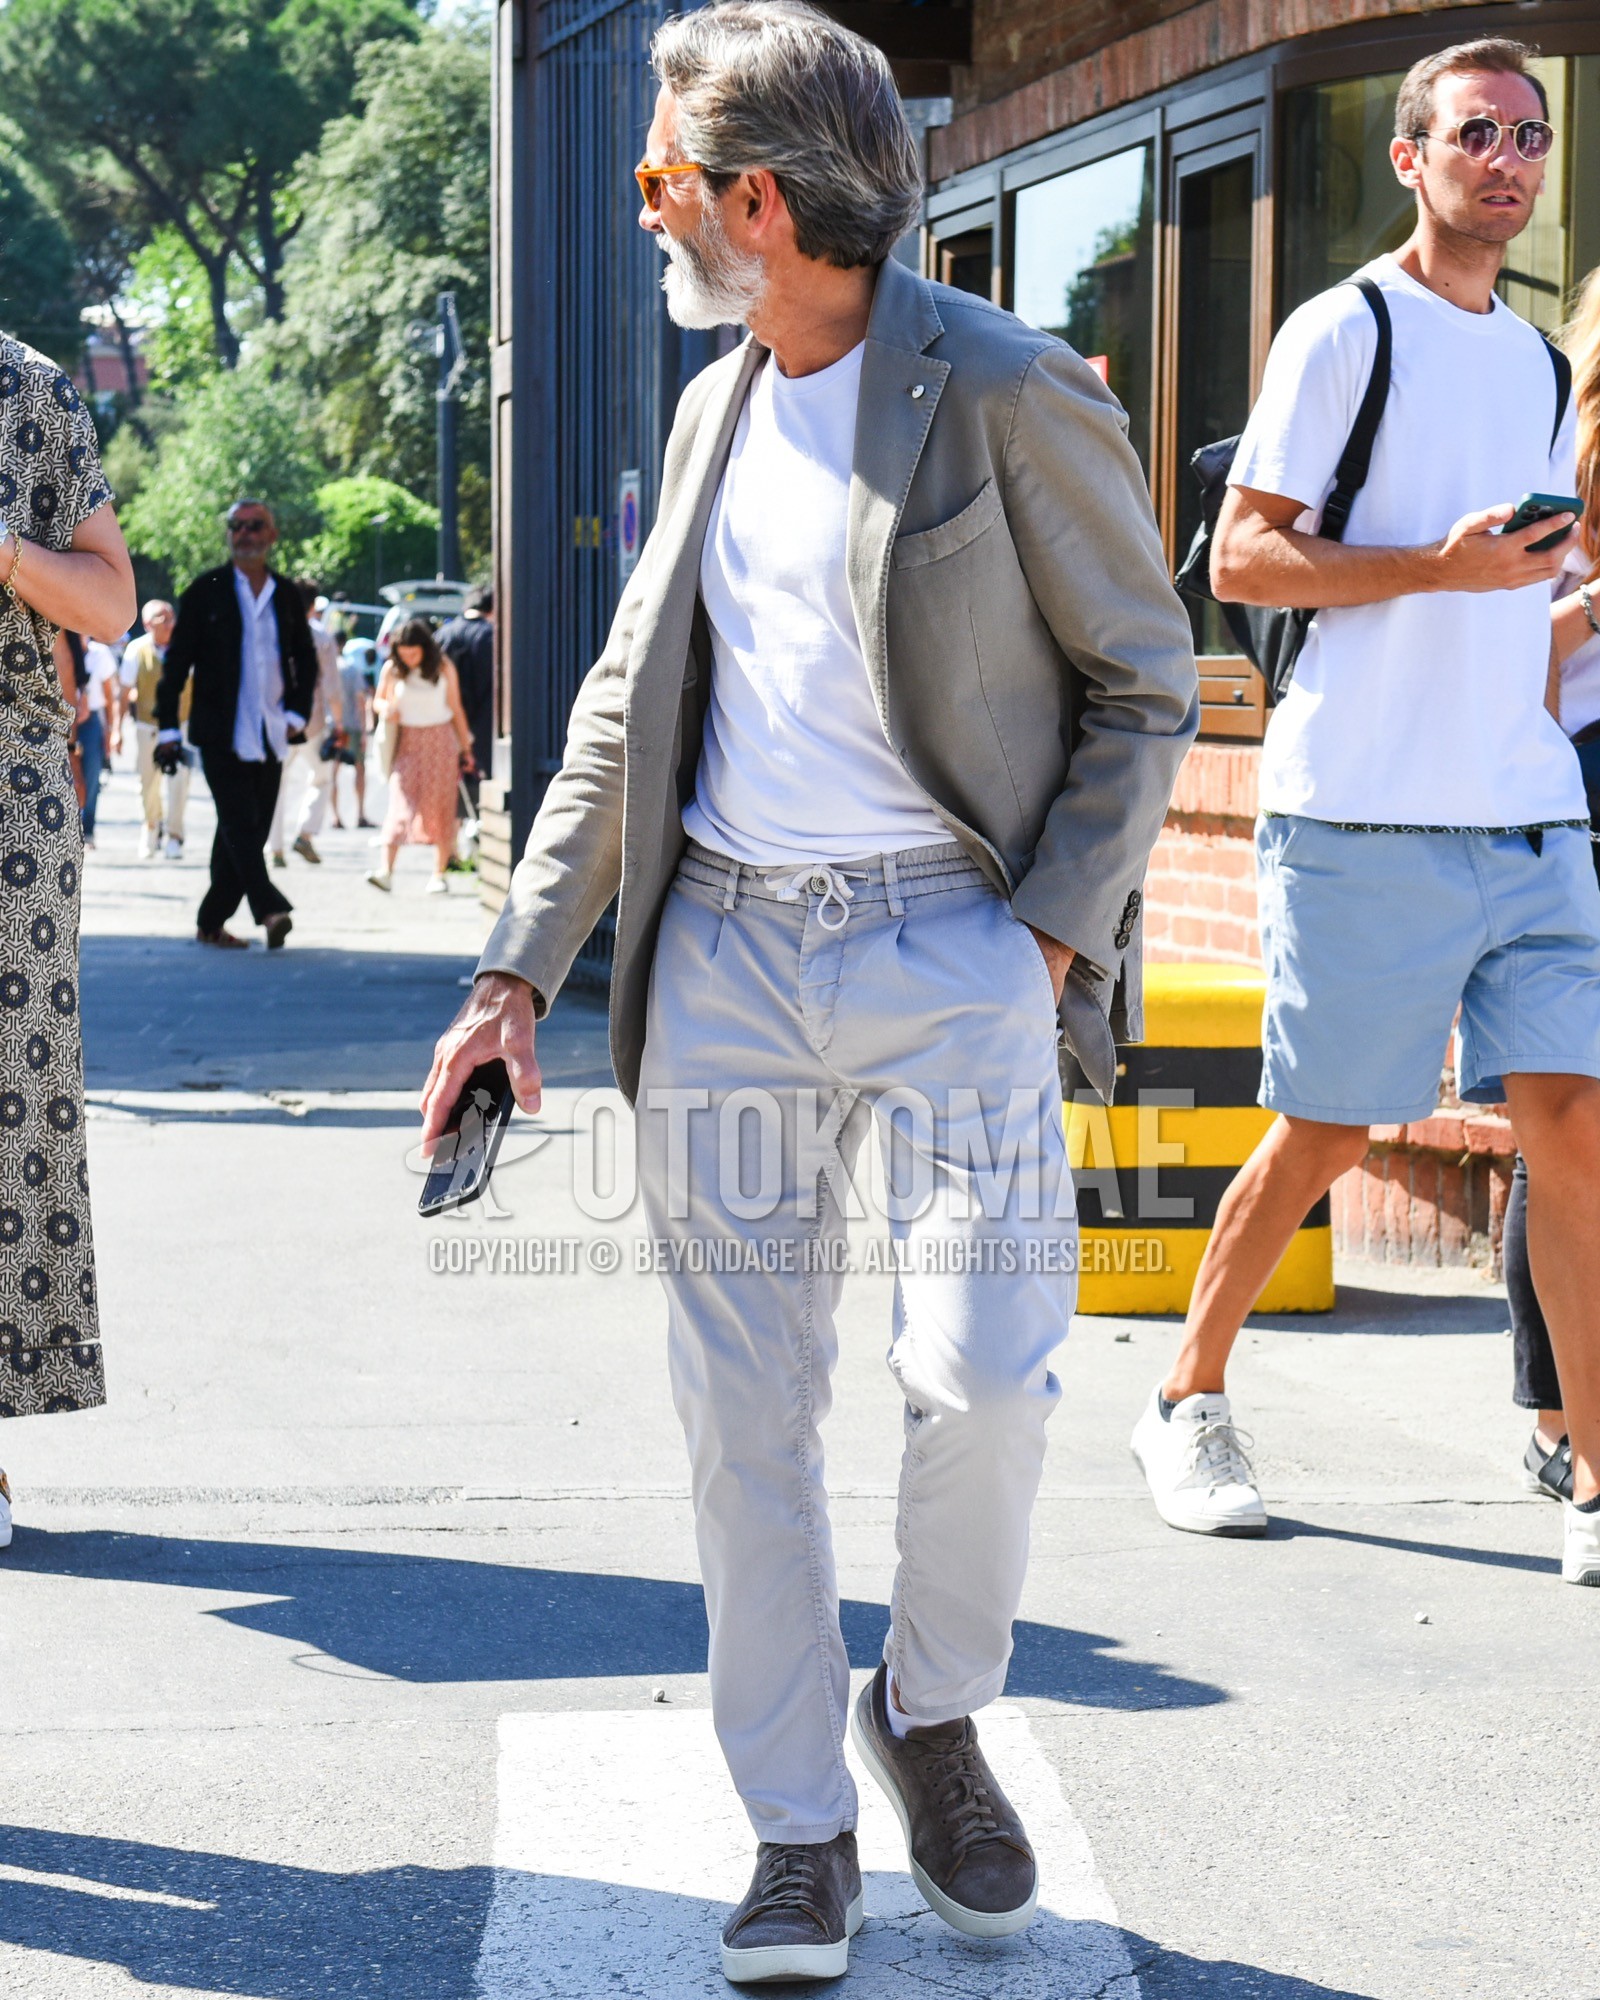 Men's spring summer outfit with yellow plain sunglasses, gray plain tailored jacket, white plain t-shirt, gray plain easy pants, white plain socks, brown low-cut sneakers.